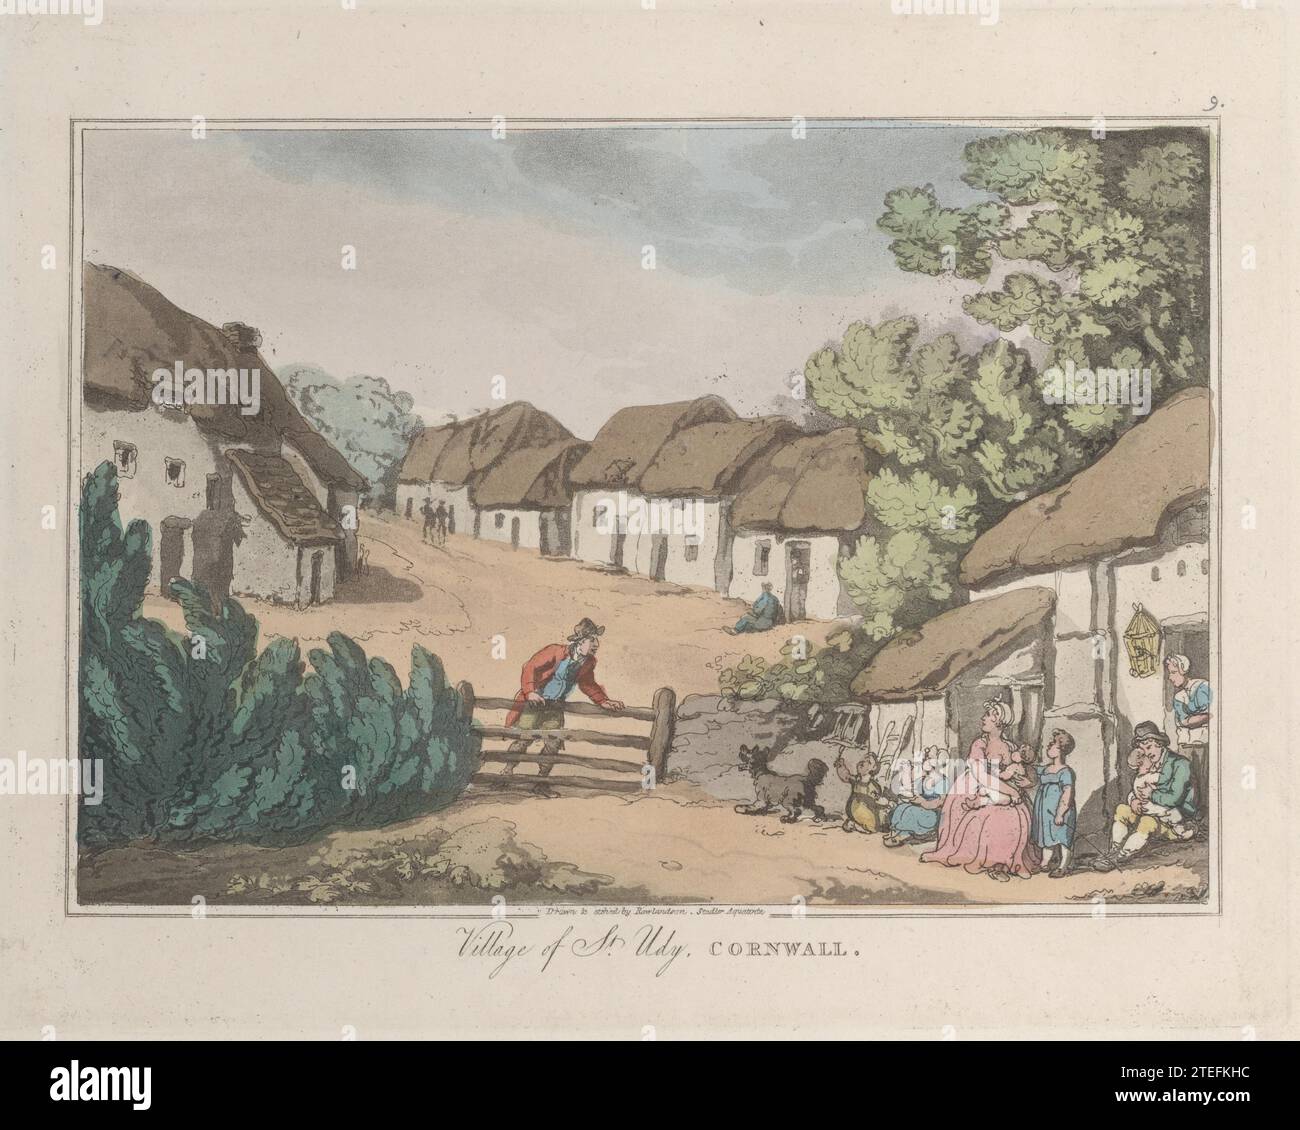 Village of St. Udy, Cornwall 1959 by Thomas Rowlandson Stock Photo